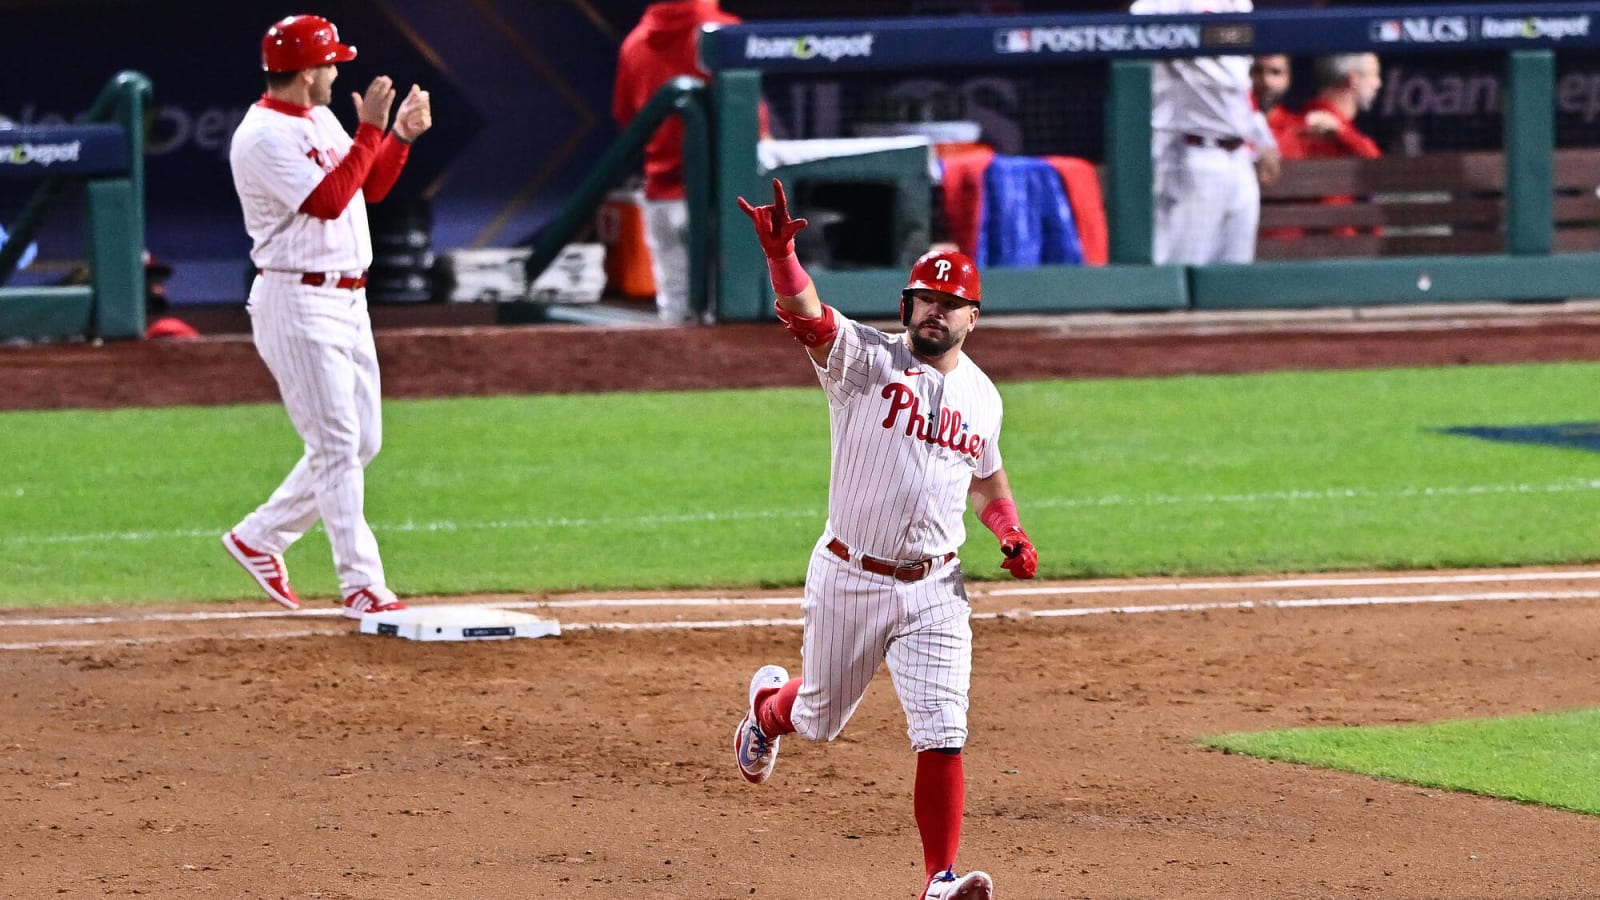 Kyle Schwarber‘s record-setting night helps lift Phillies to a dominant 2-0 NLCS lead over Diamondbacks